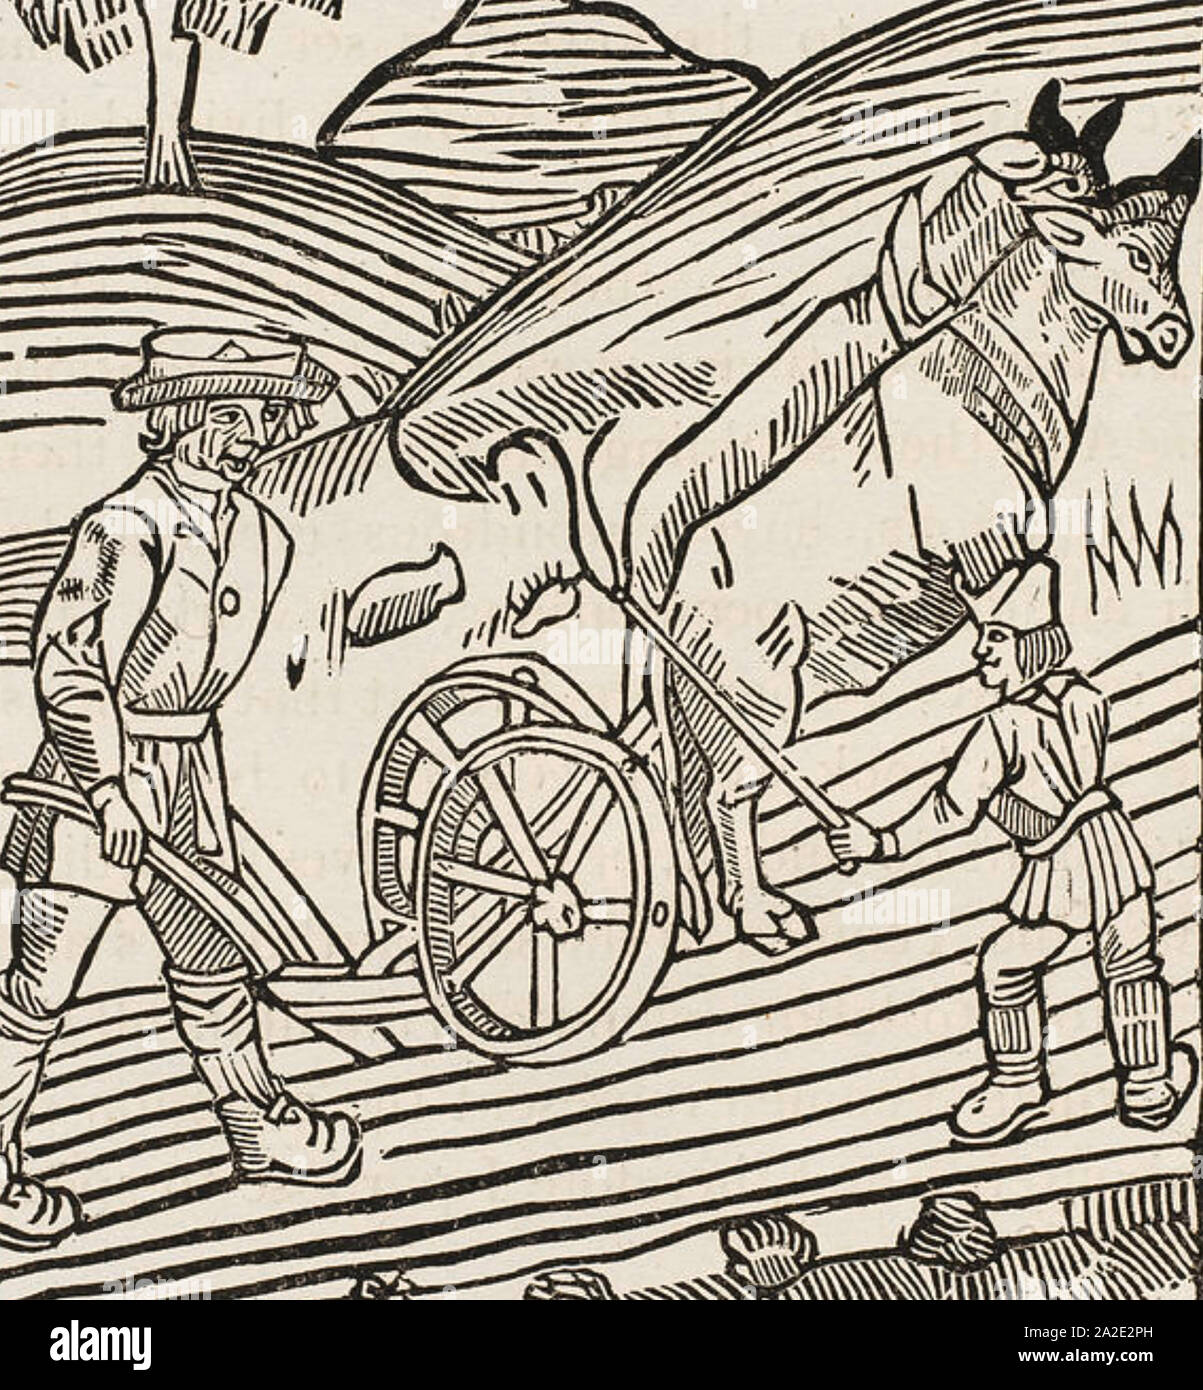 PLOUGHING in a 16th century German woodcut Stock Photo